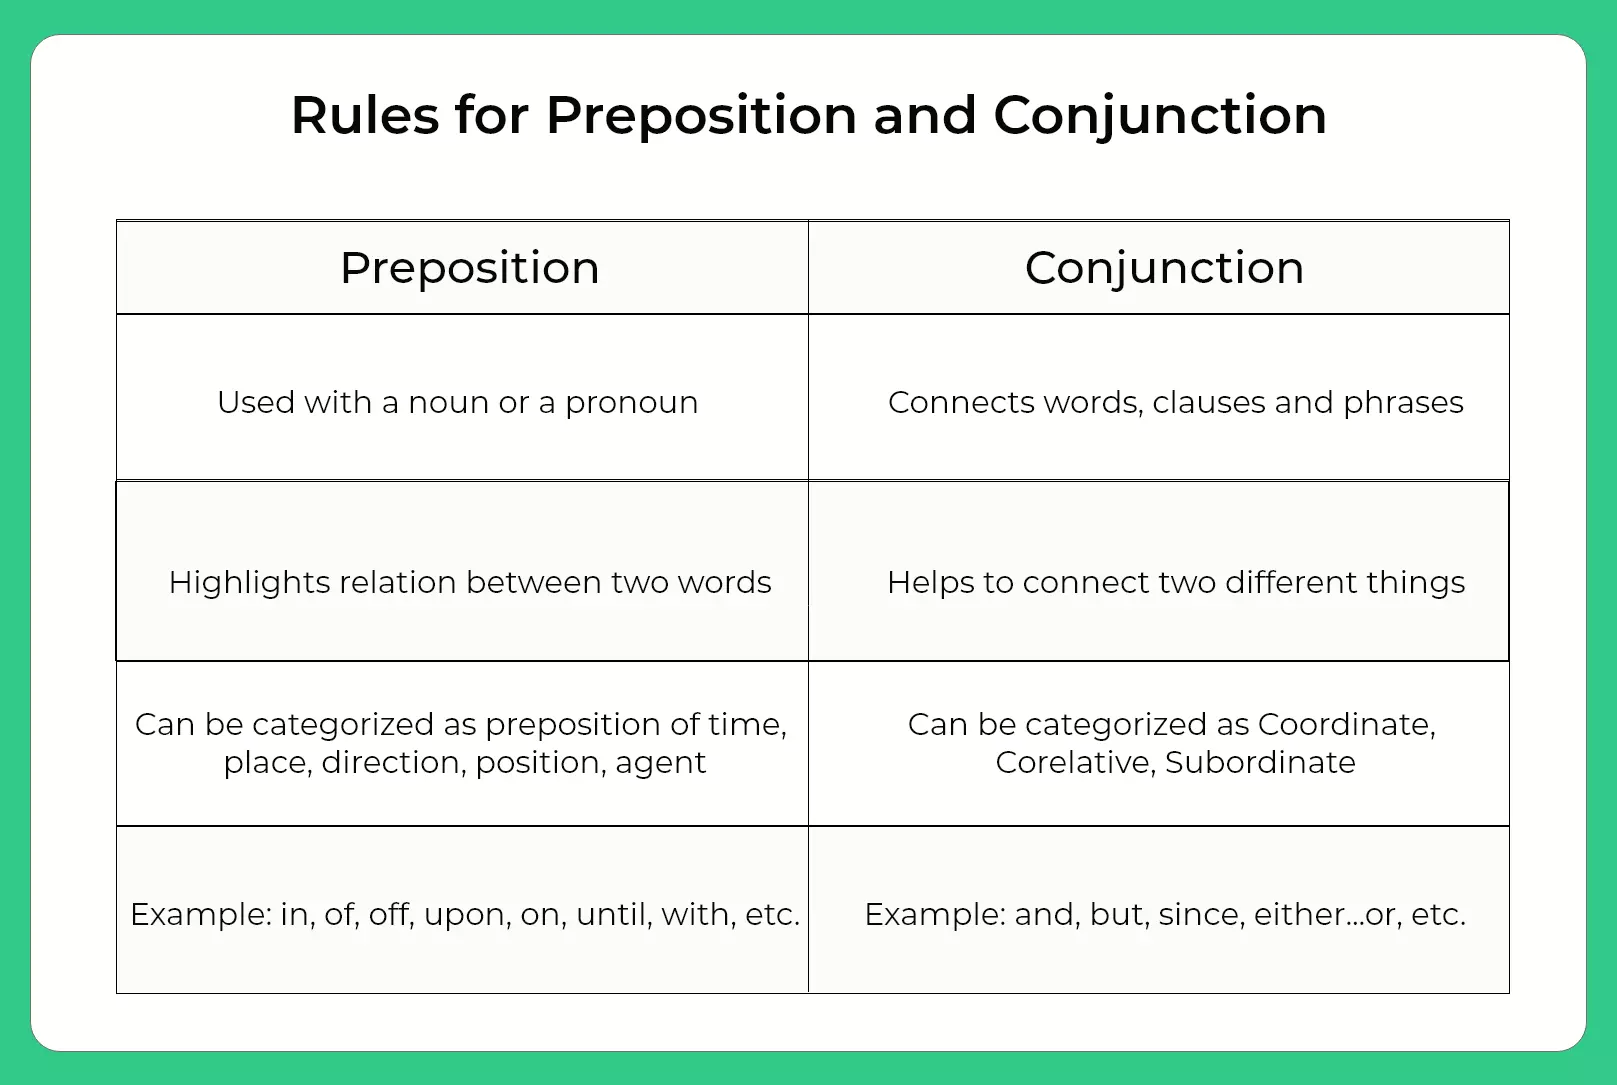 Rules for Preposition and Conjunction